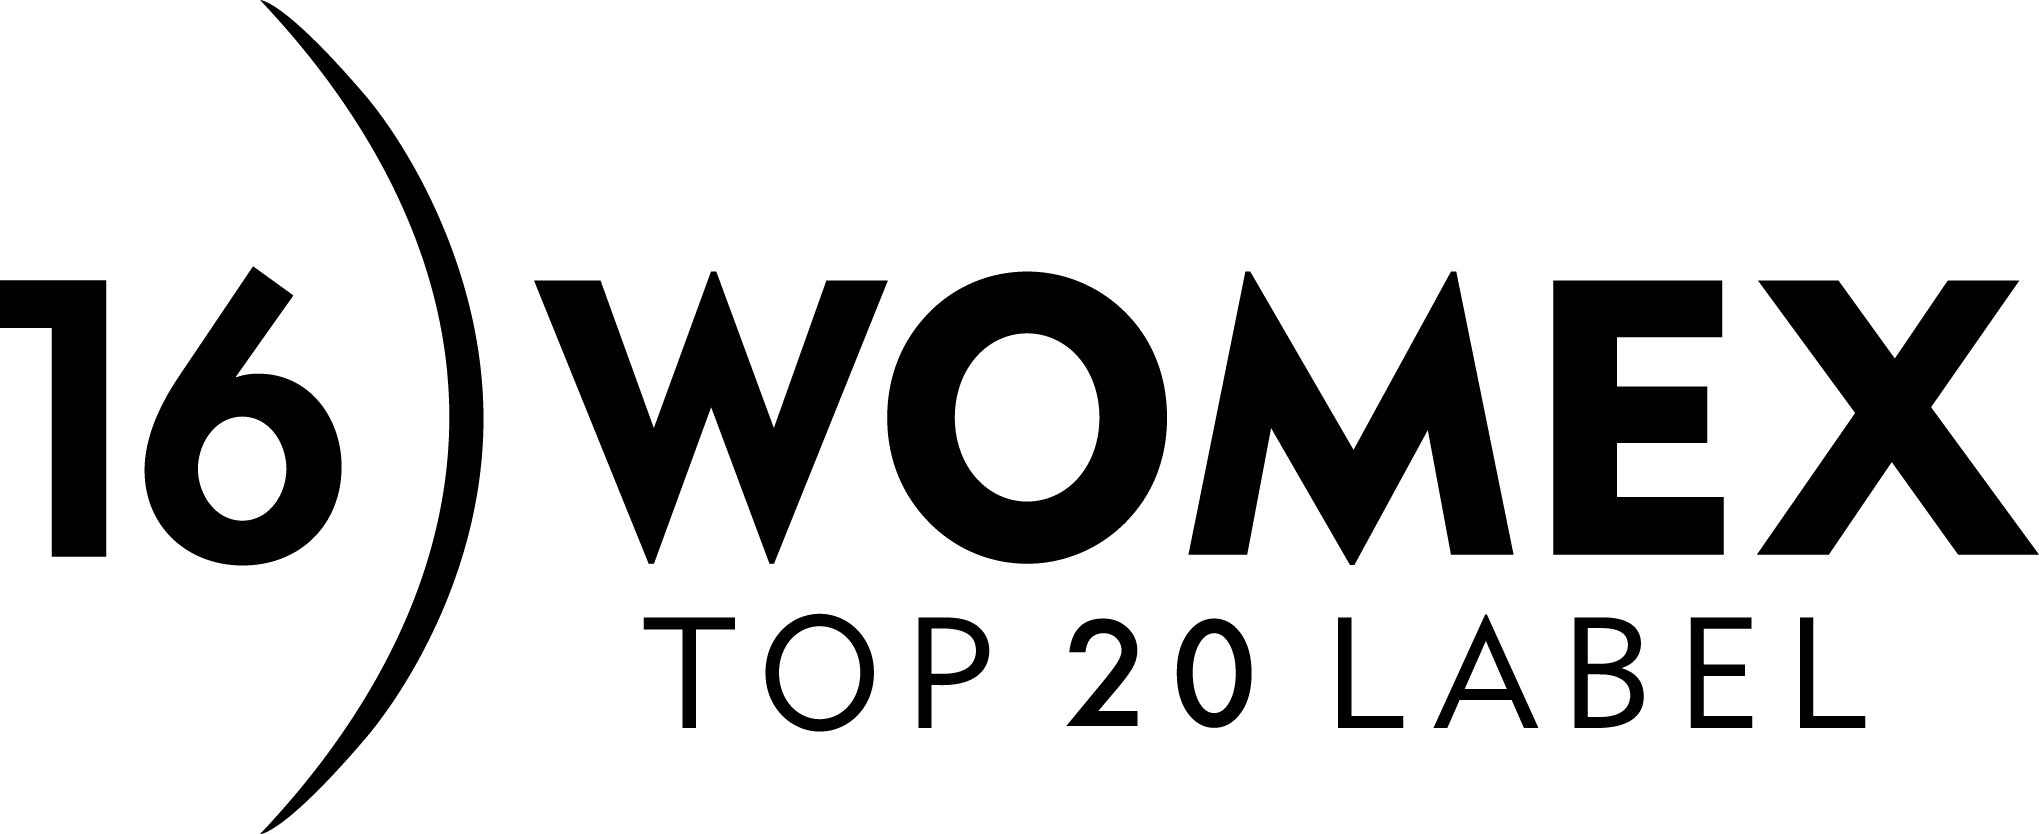 Womex 2016 Top 20 Label